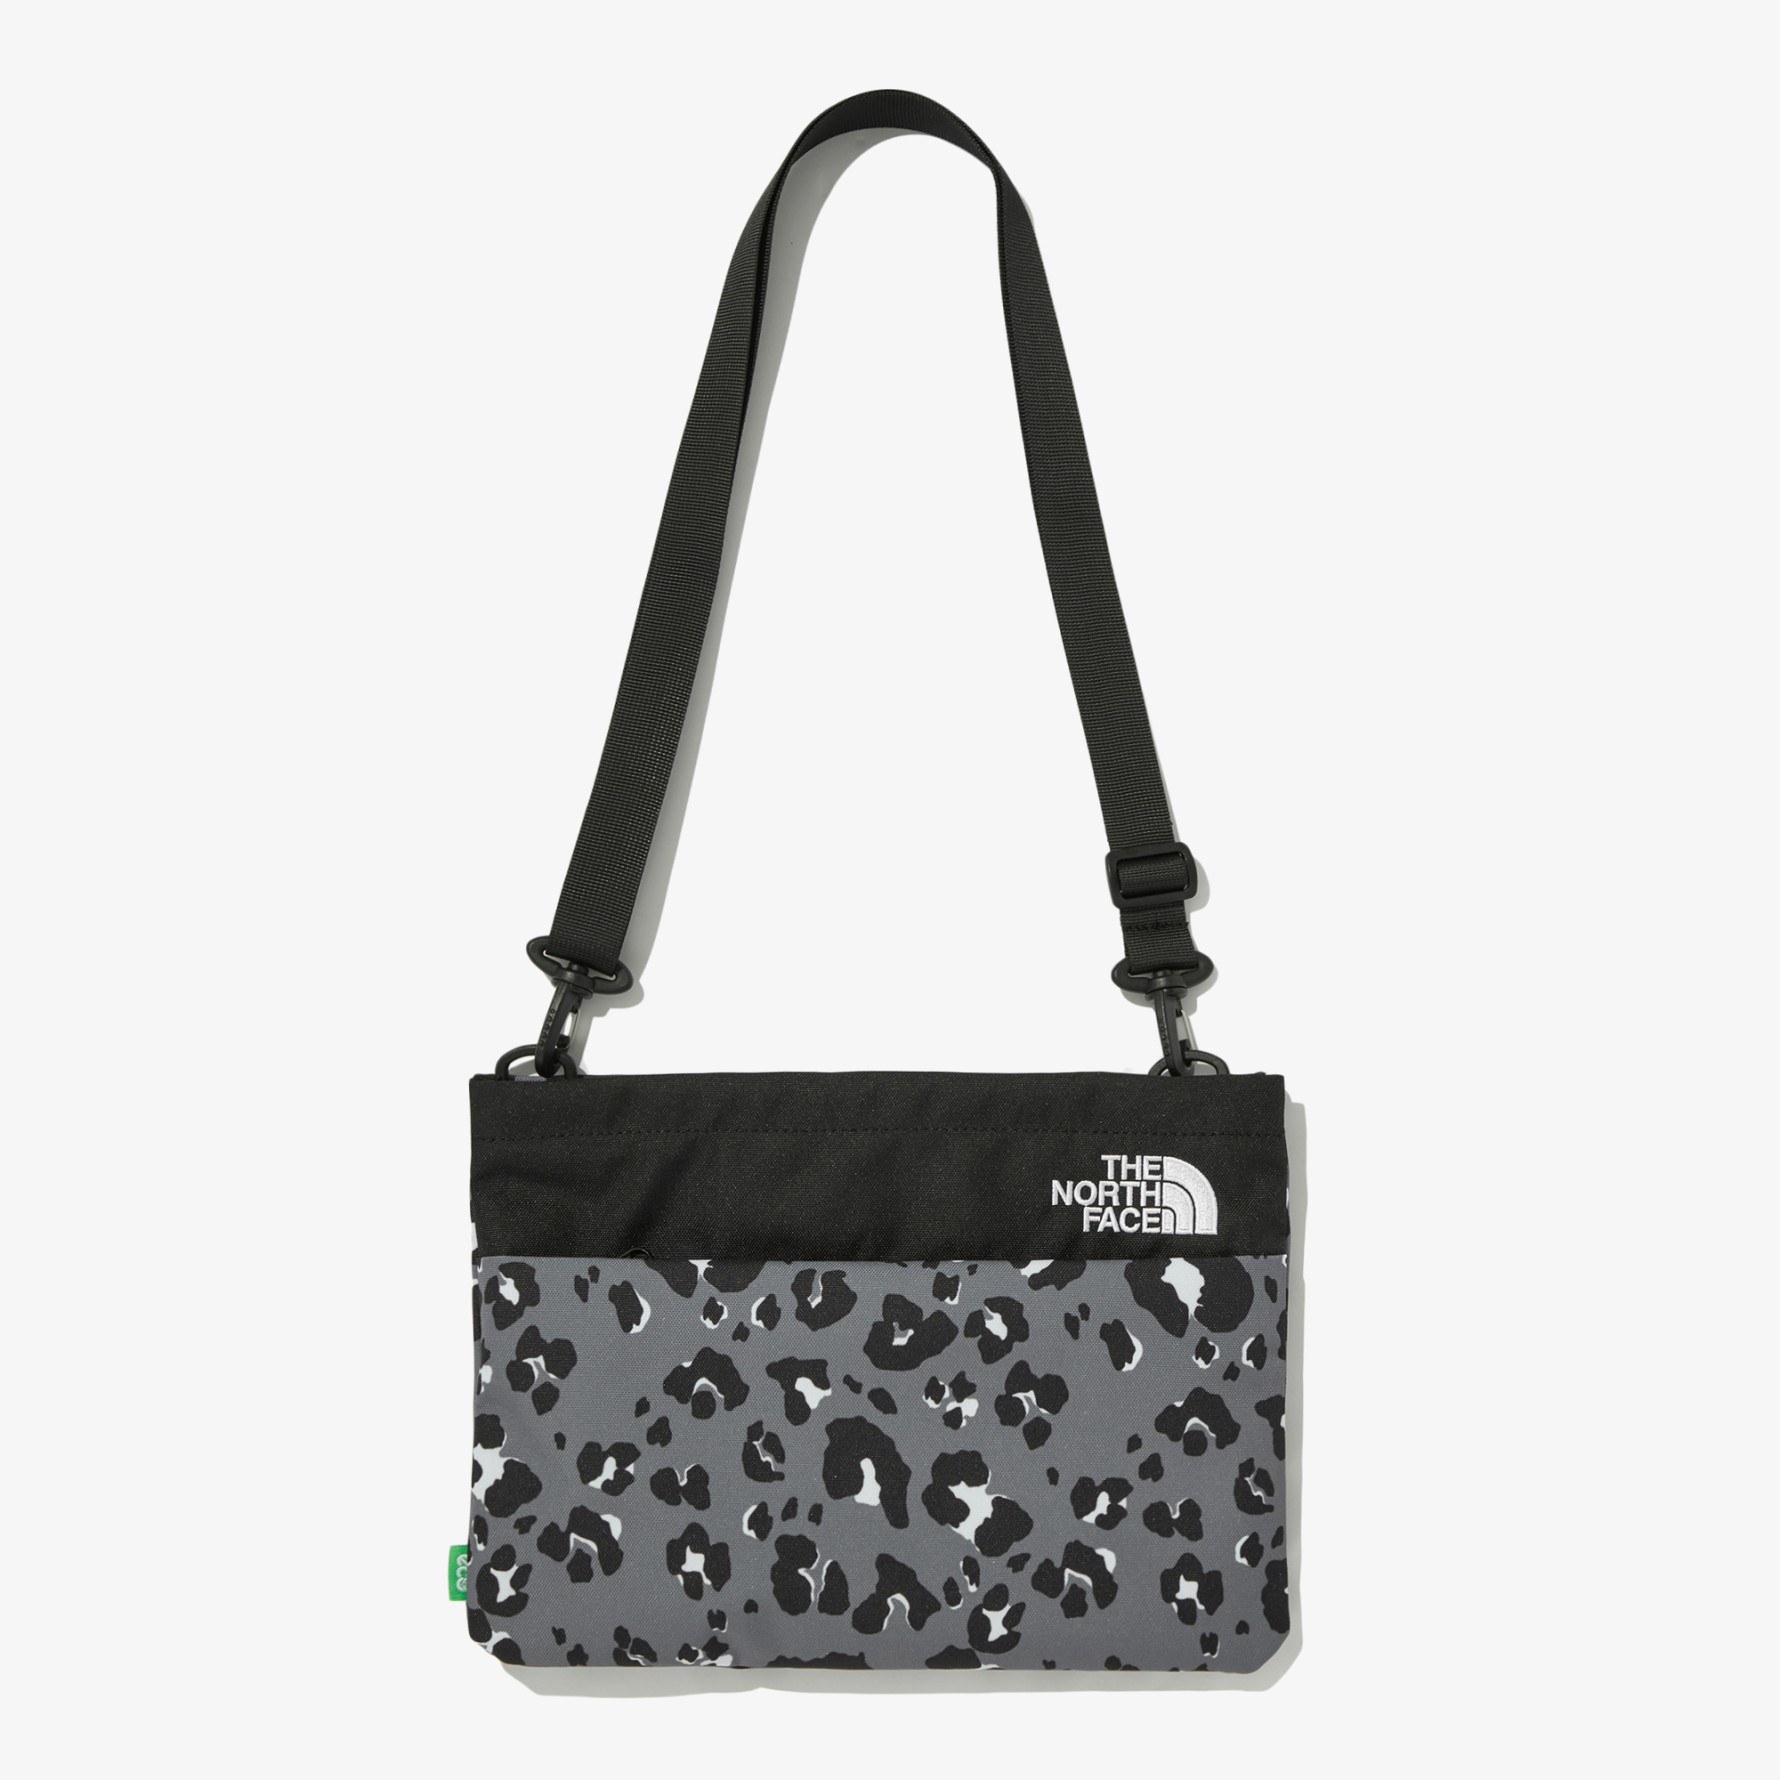 THE NORTH FACE - SLIM CROSS BAG (CHARCOAL)